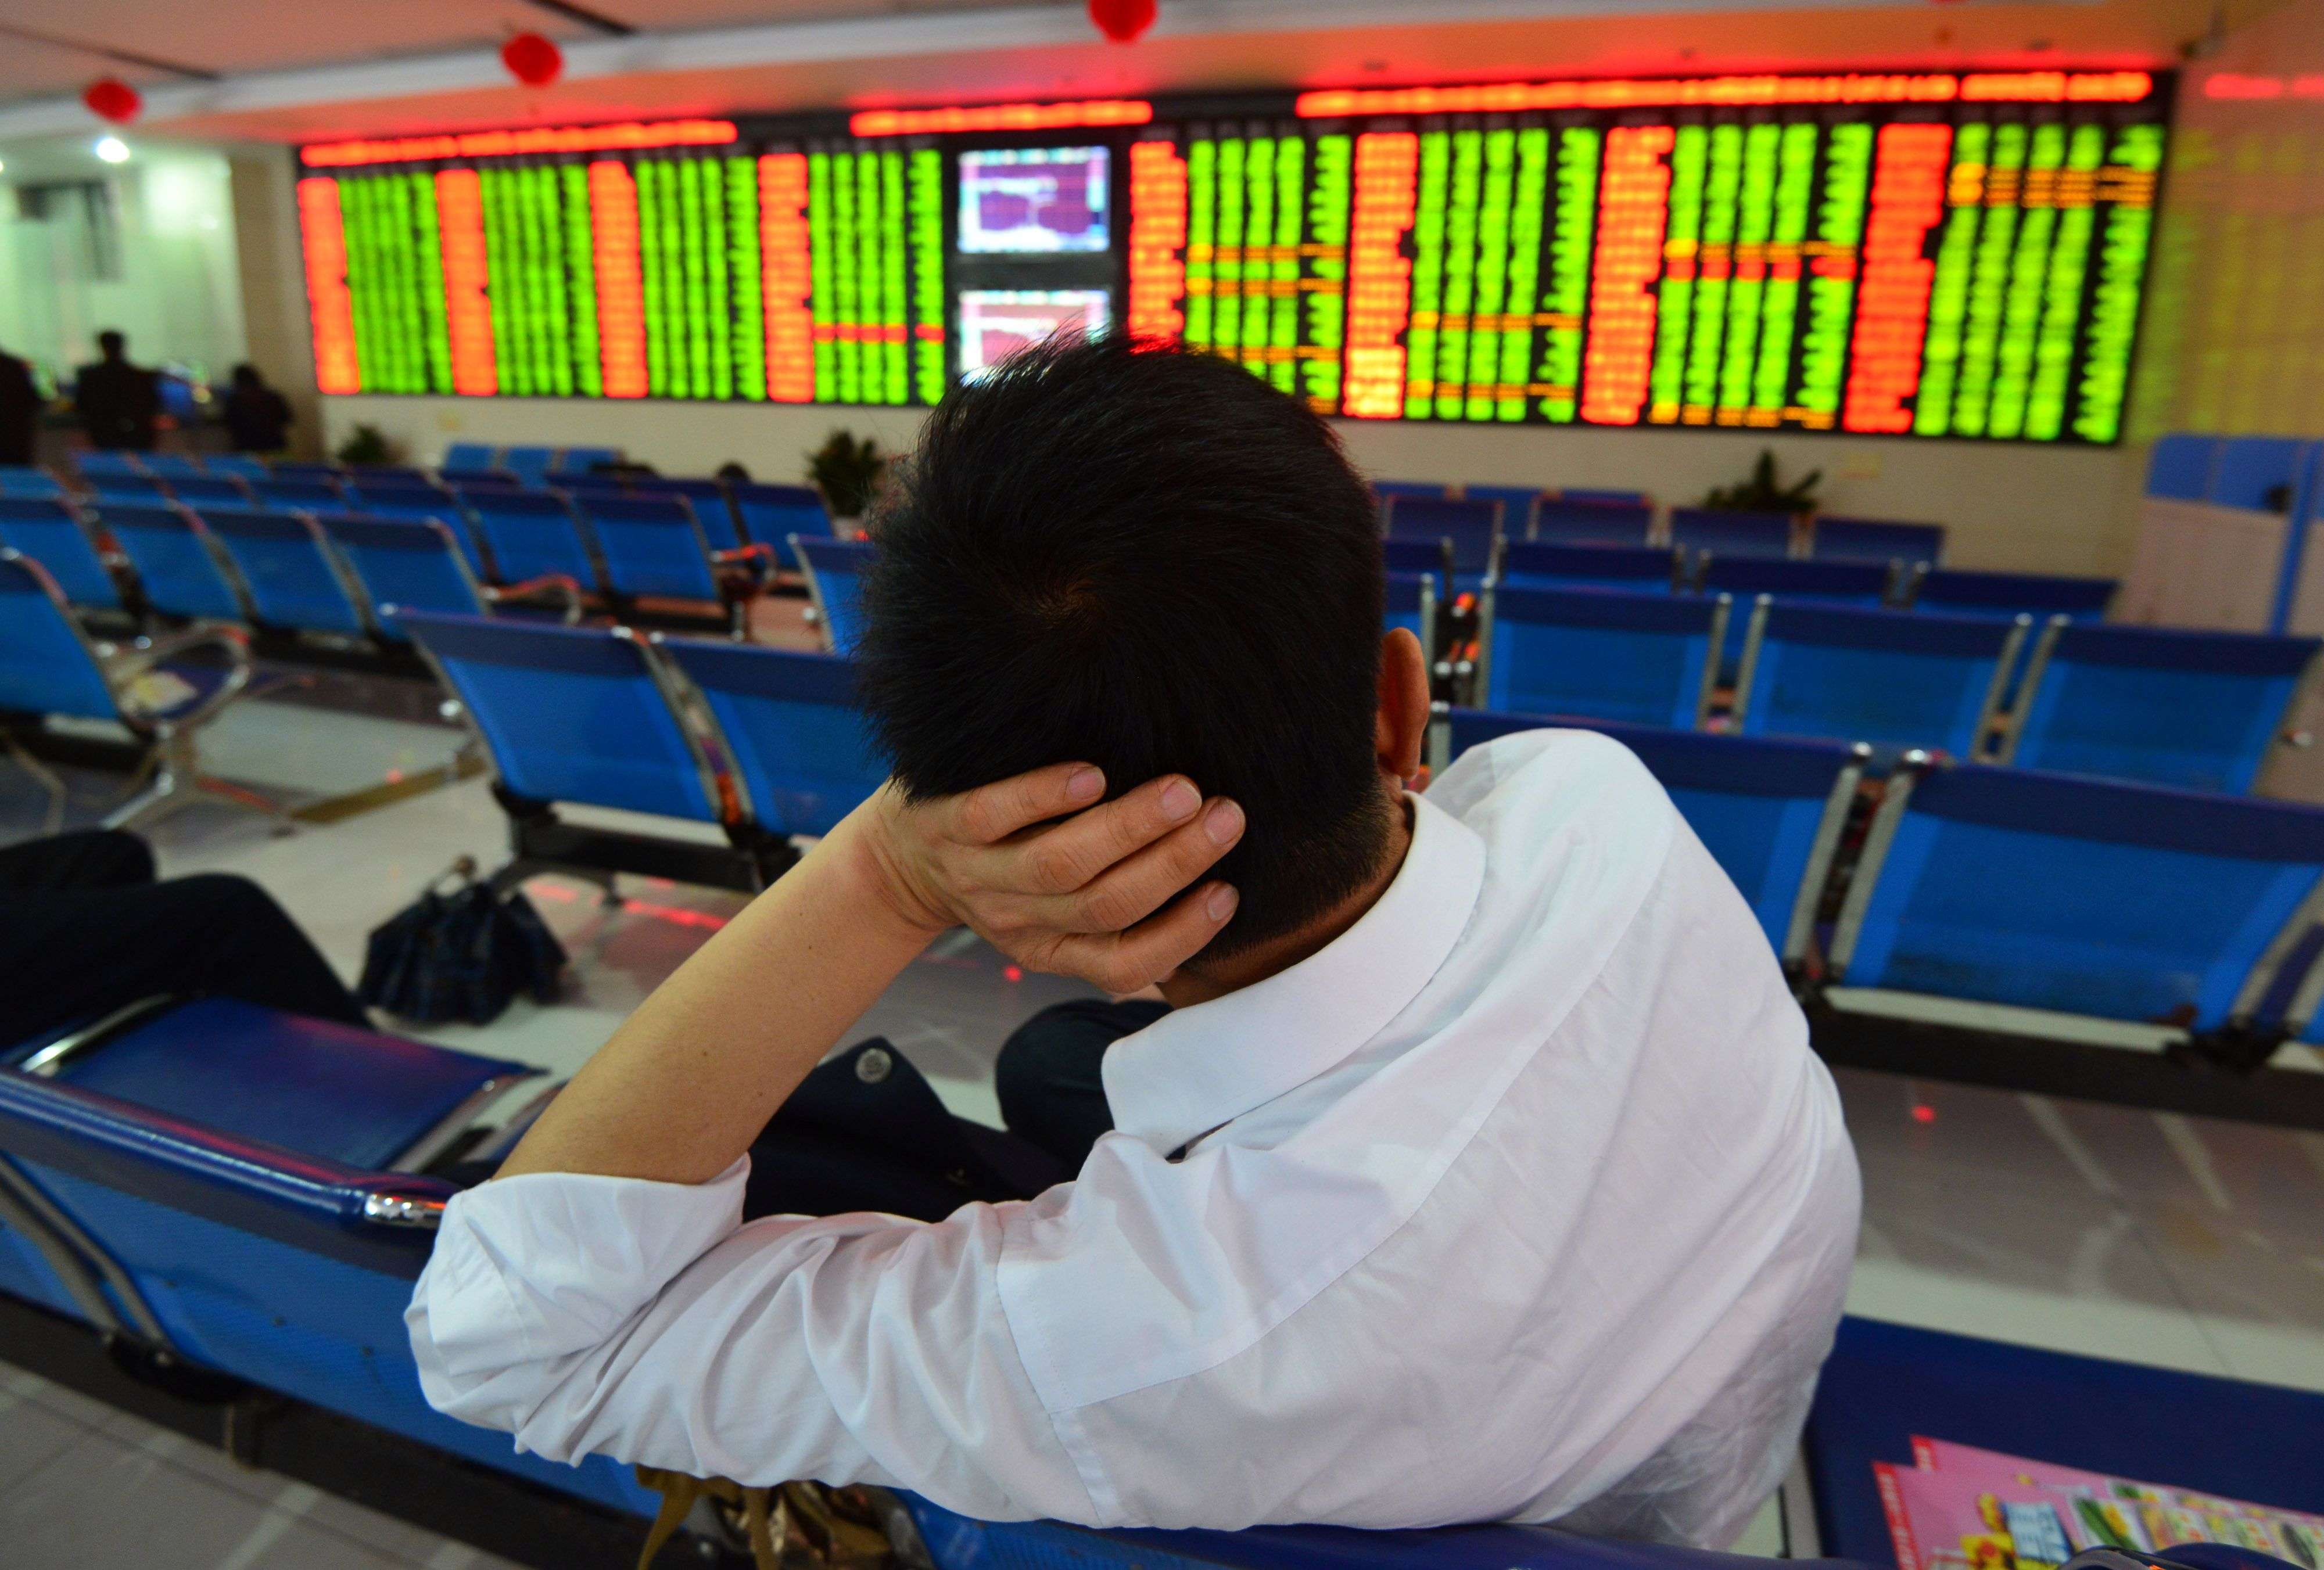 Investment income of Chinese insurance companies has suffered as the stock markets remain volatile. Photo: AFP